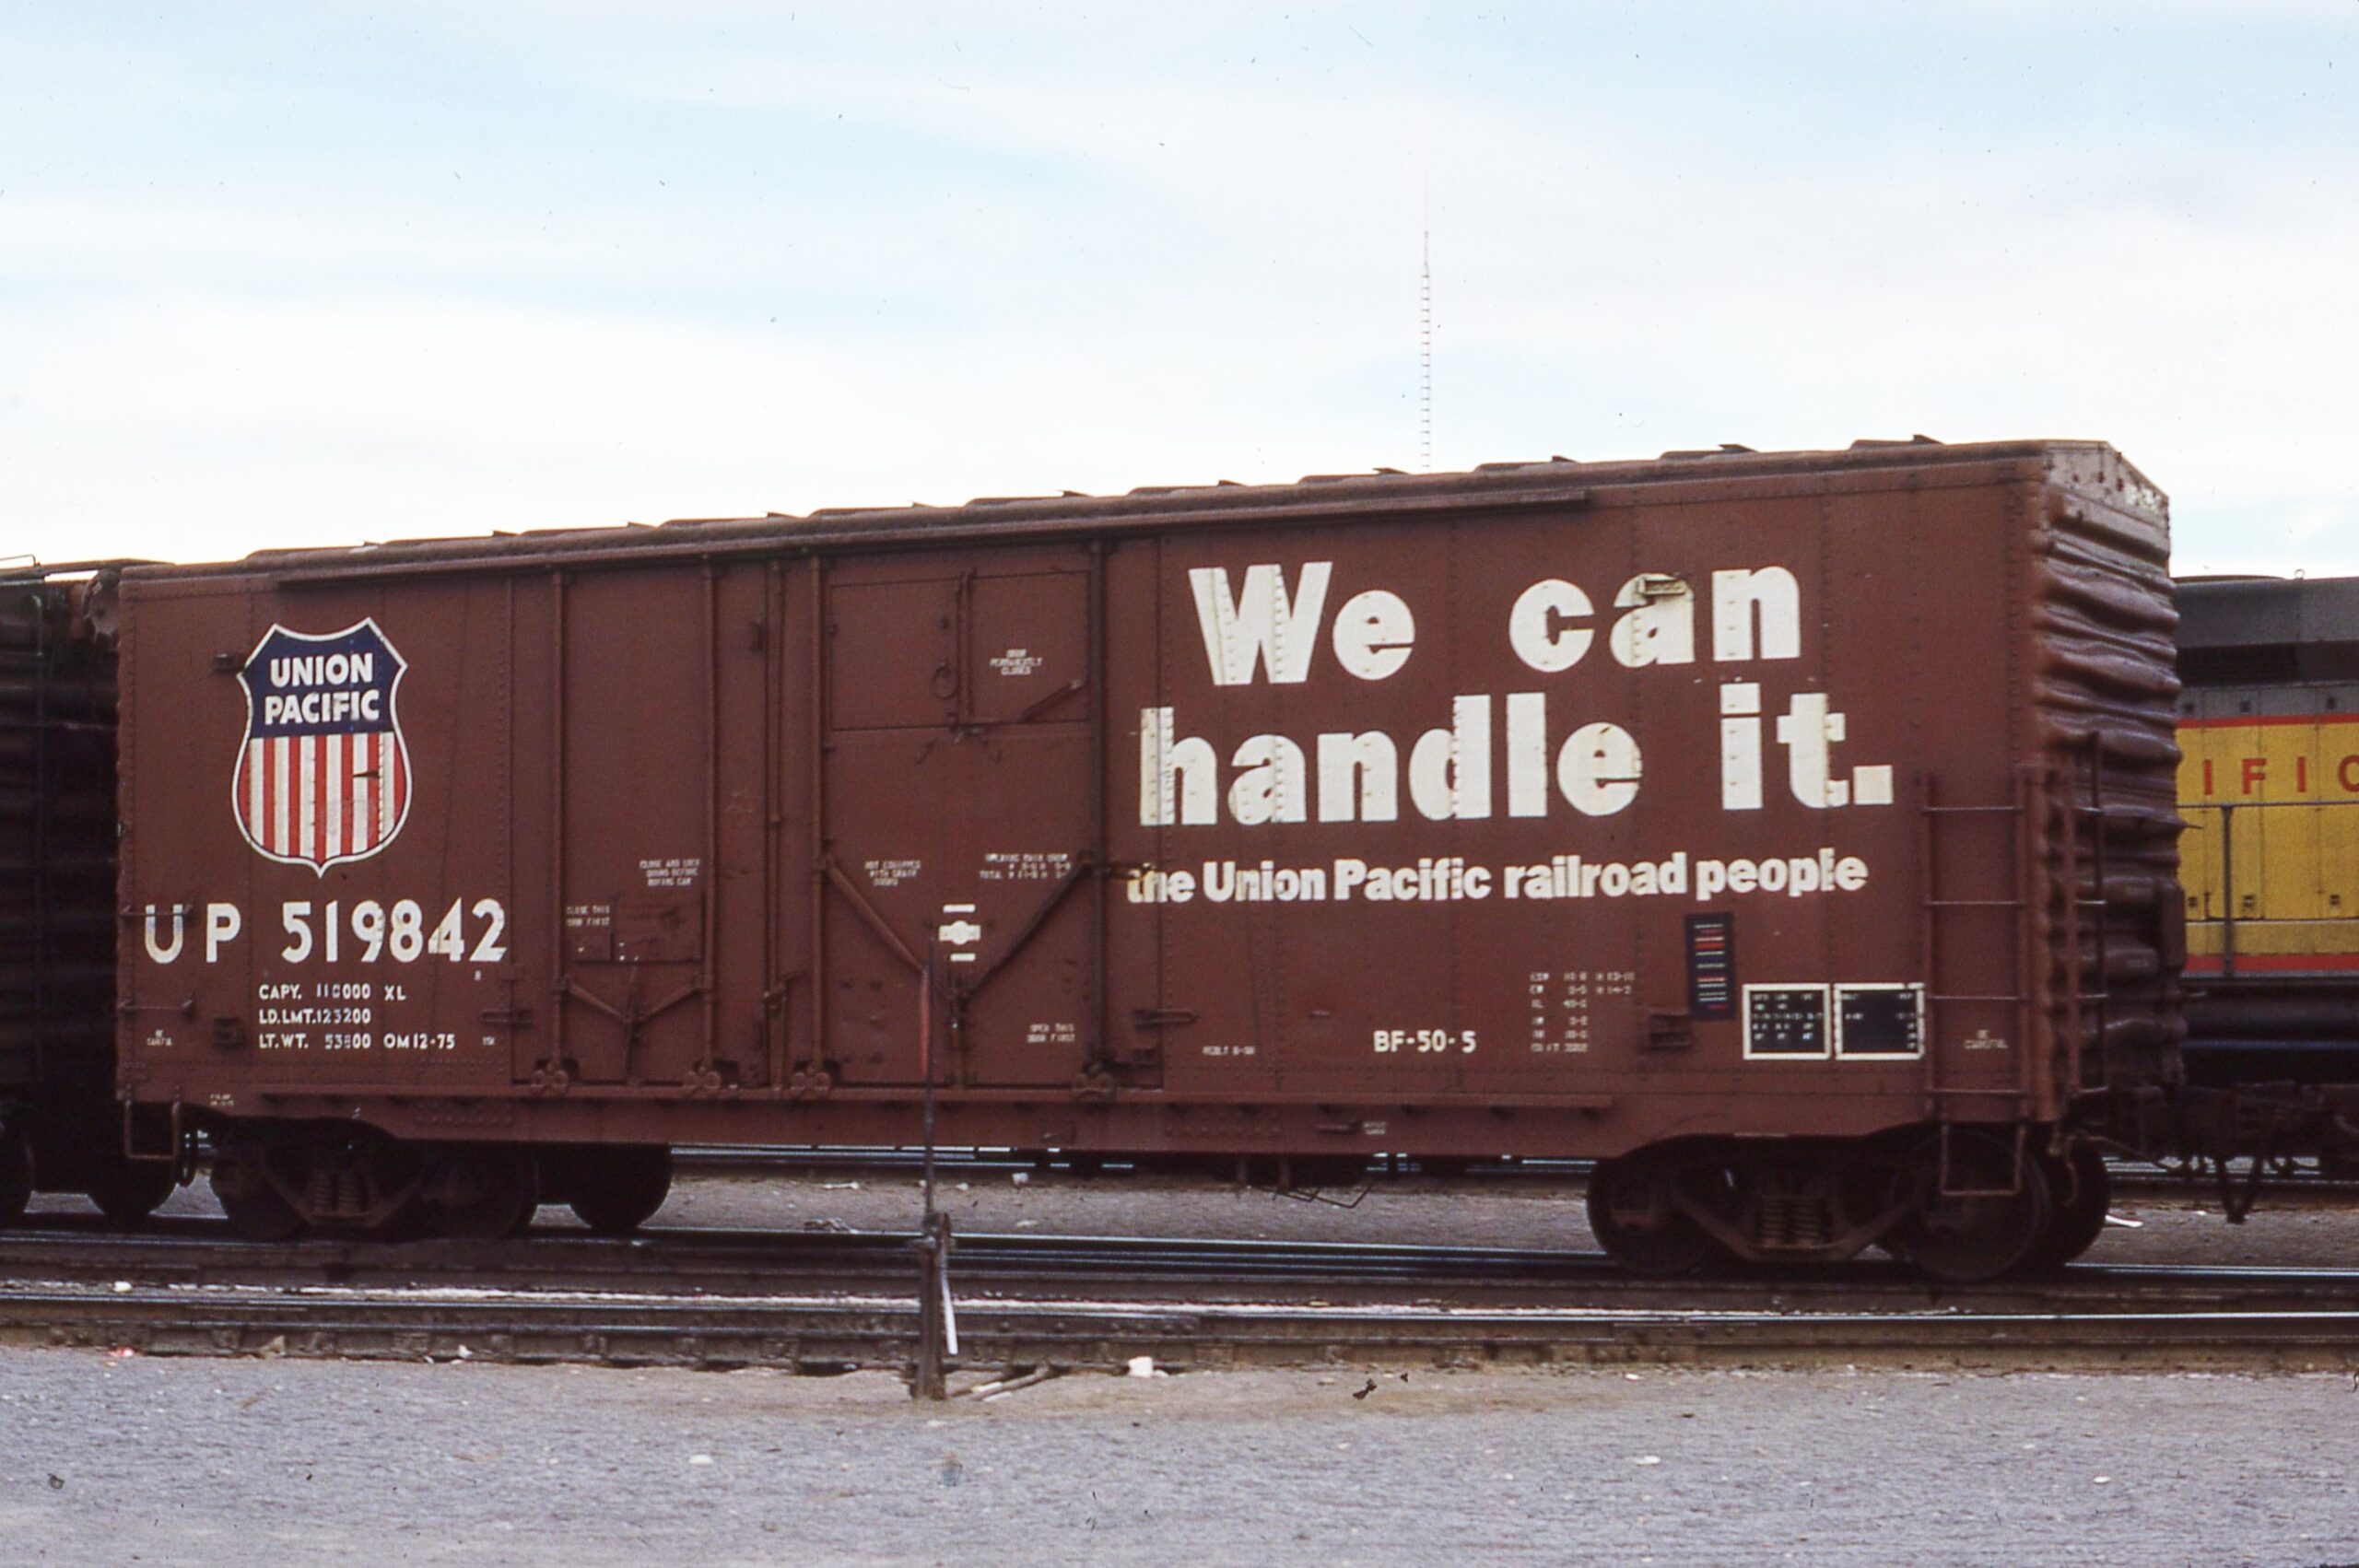 Union Pacific | Las Vegas, Nevada | Class BF-50-5 Box car 40 foot 6 inch, double plug door #UP19842 | December 14, 1977 | Steve Timko collection